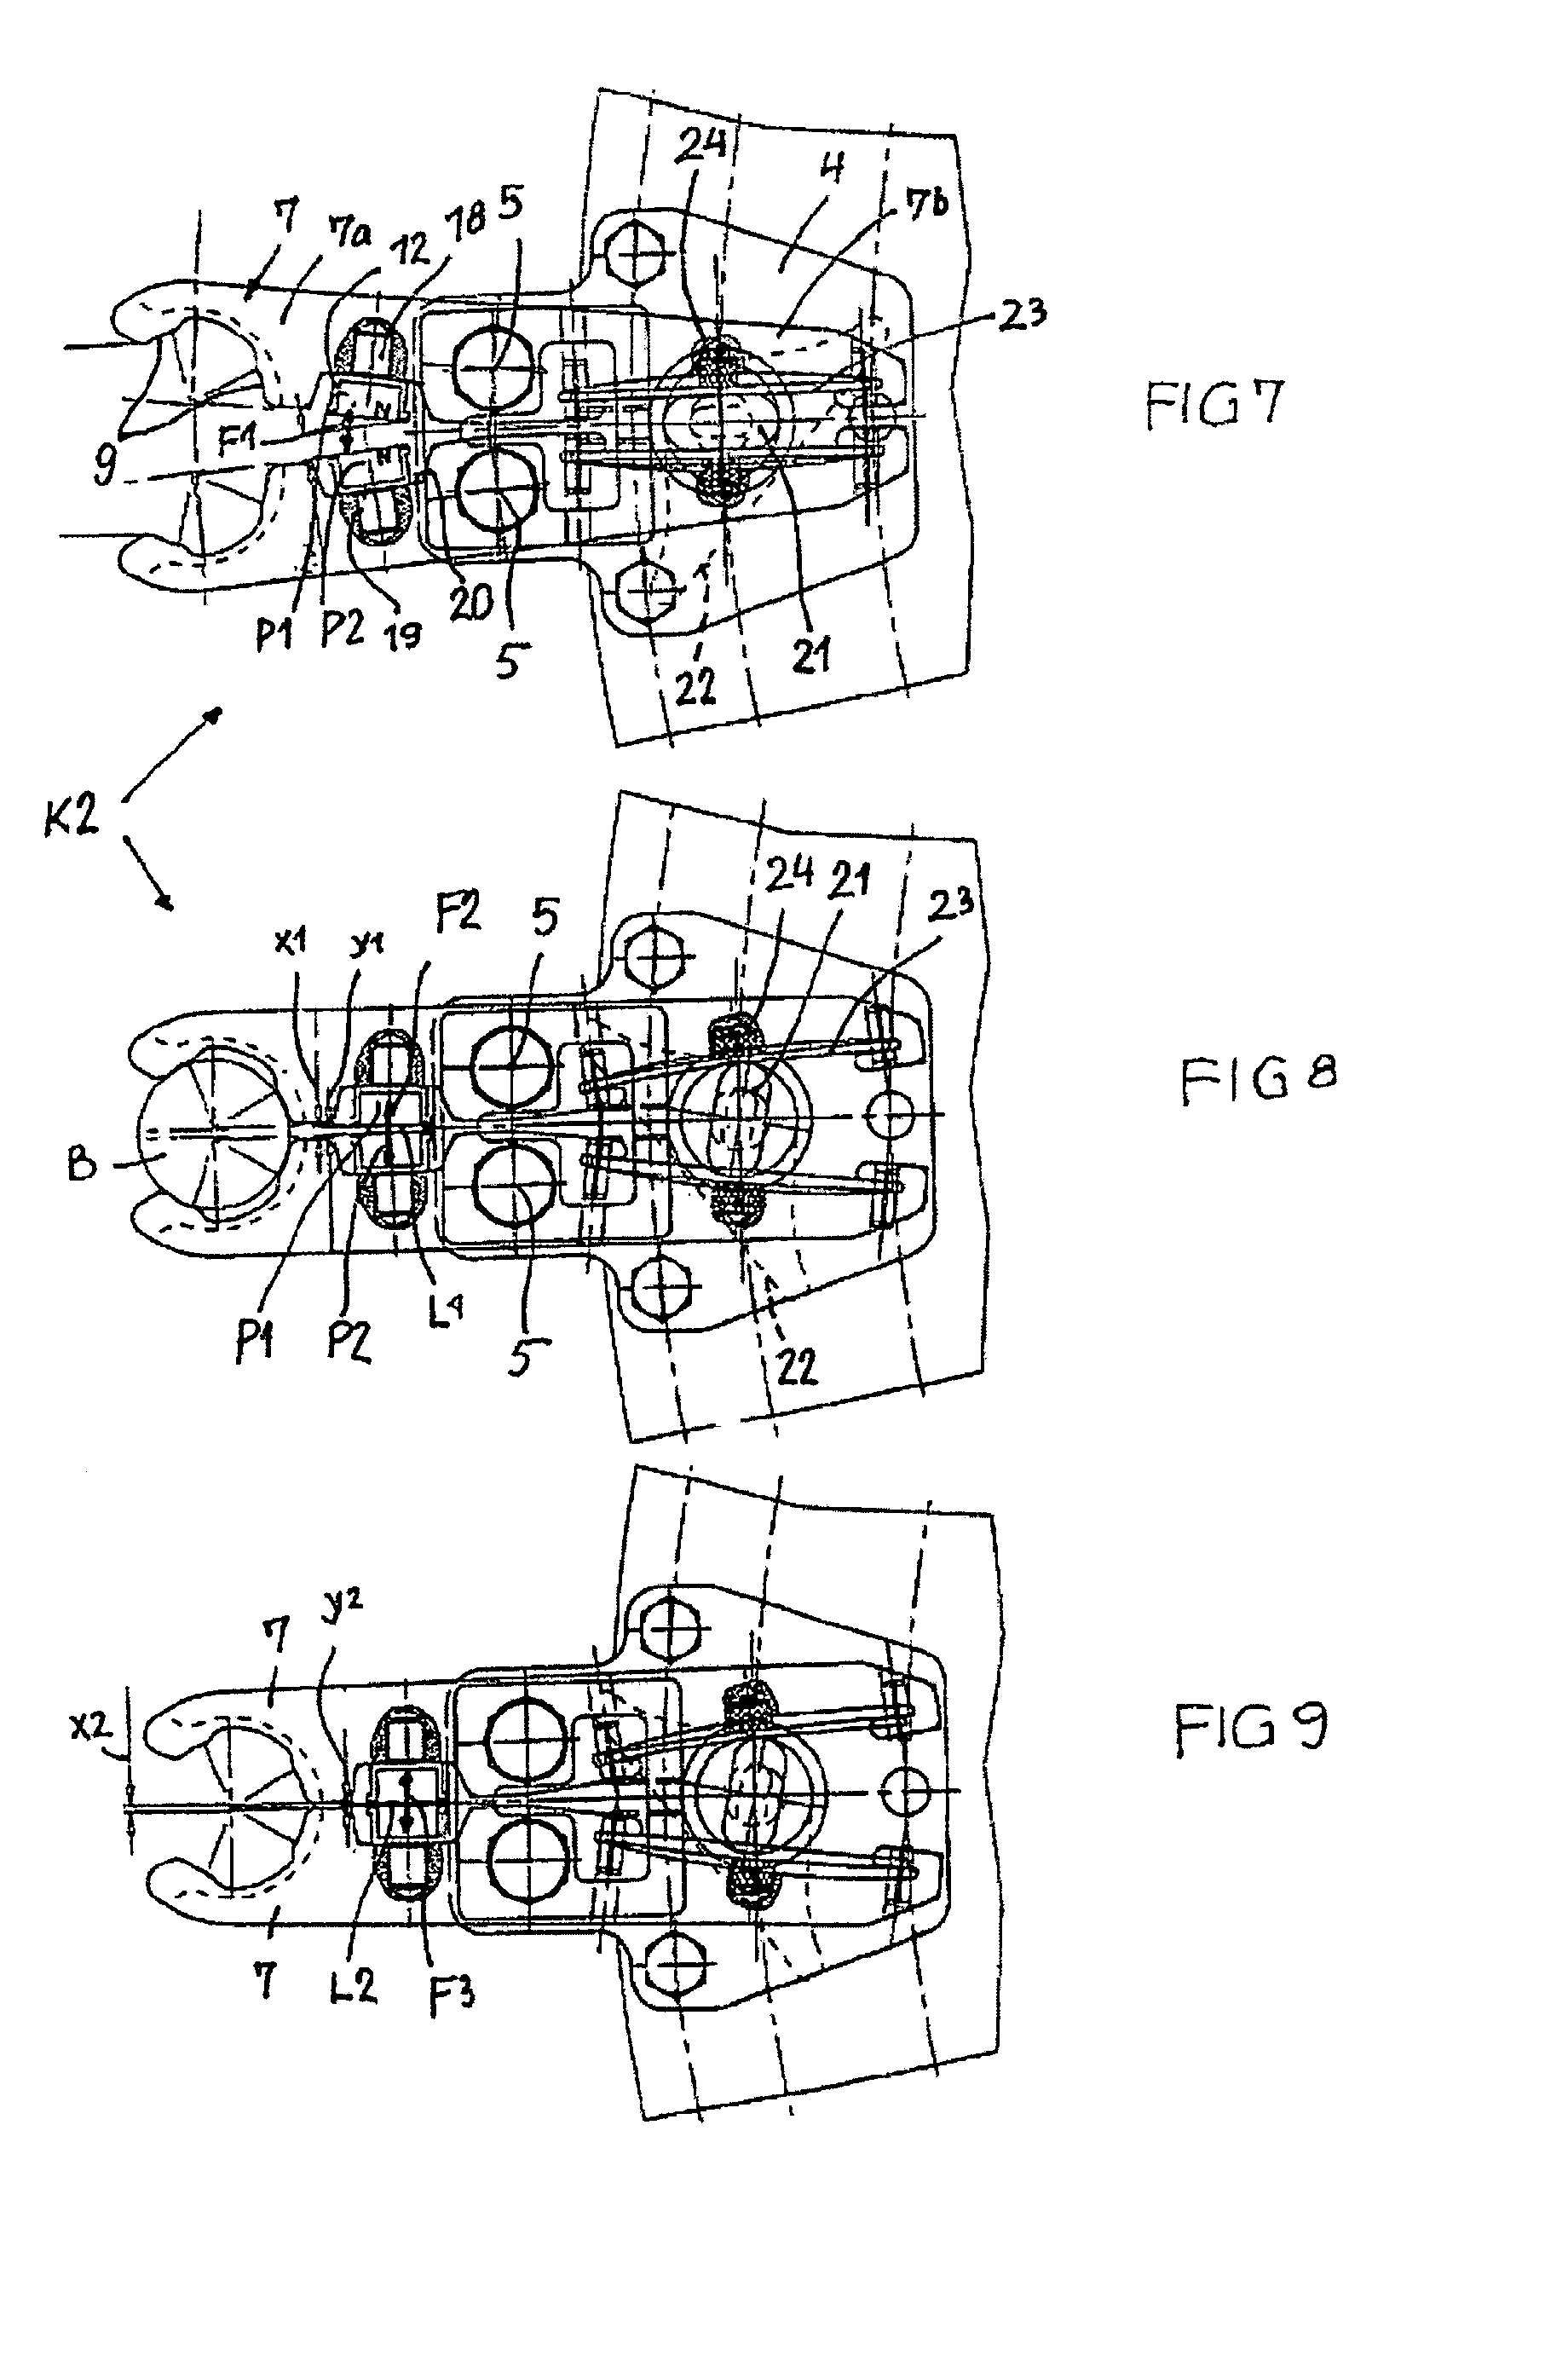 Claw for a container transporting system